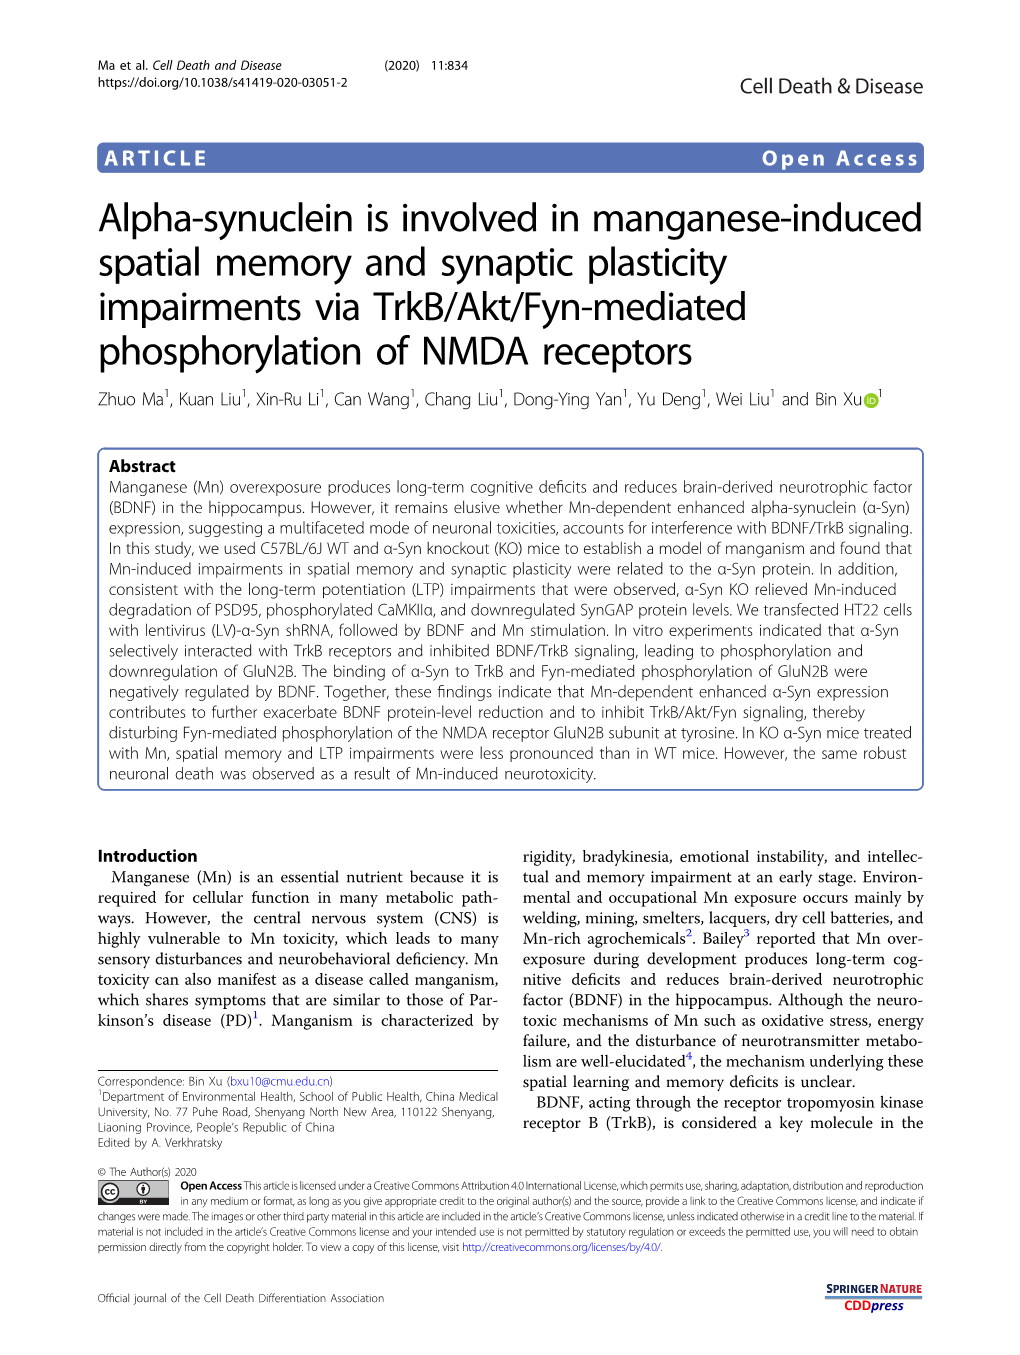 Alpha-Synuclein Is Involved in Manganese-Induced Spatial